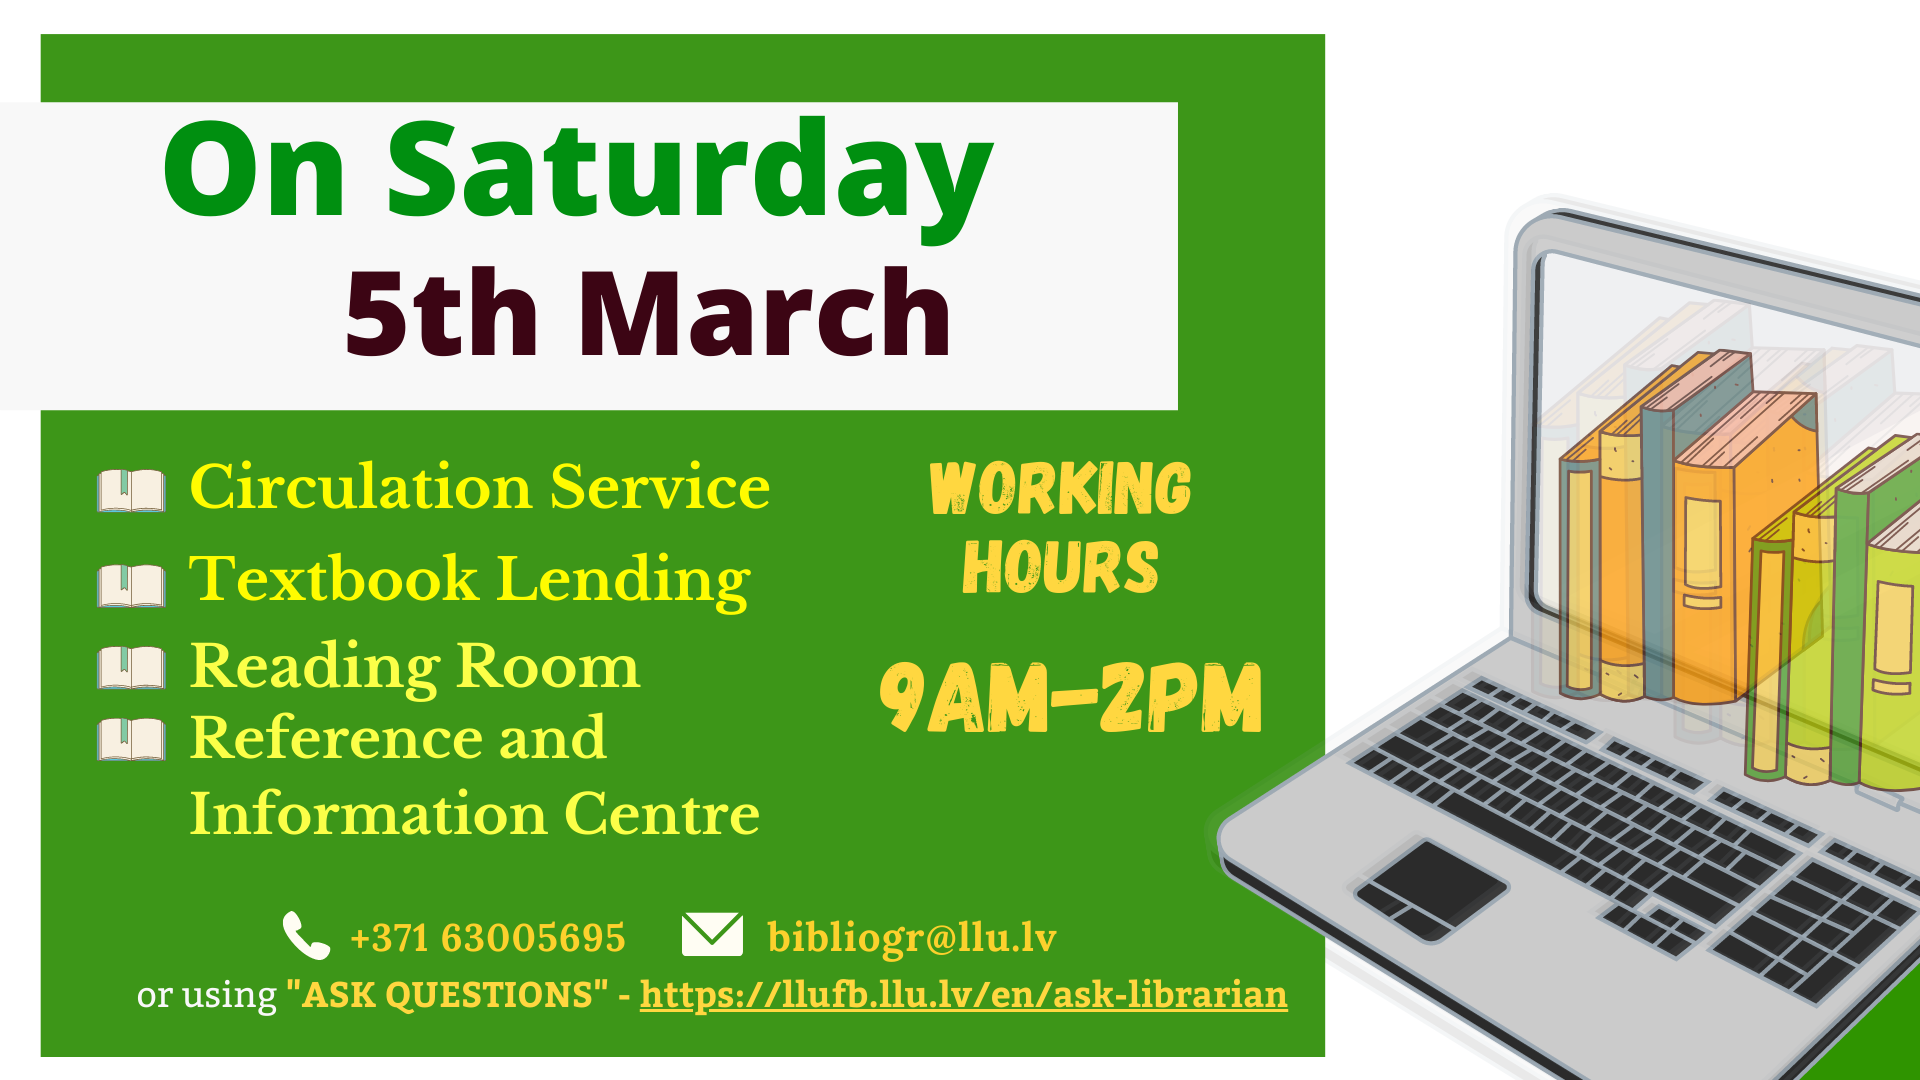 Library of the Latvia University of Life Sciences and Technologies on Saturday 8 March working hours 9am-2pm